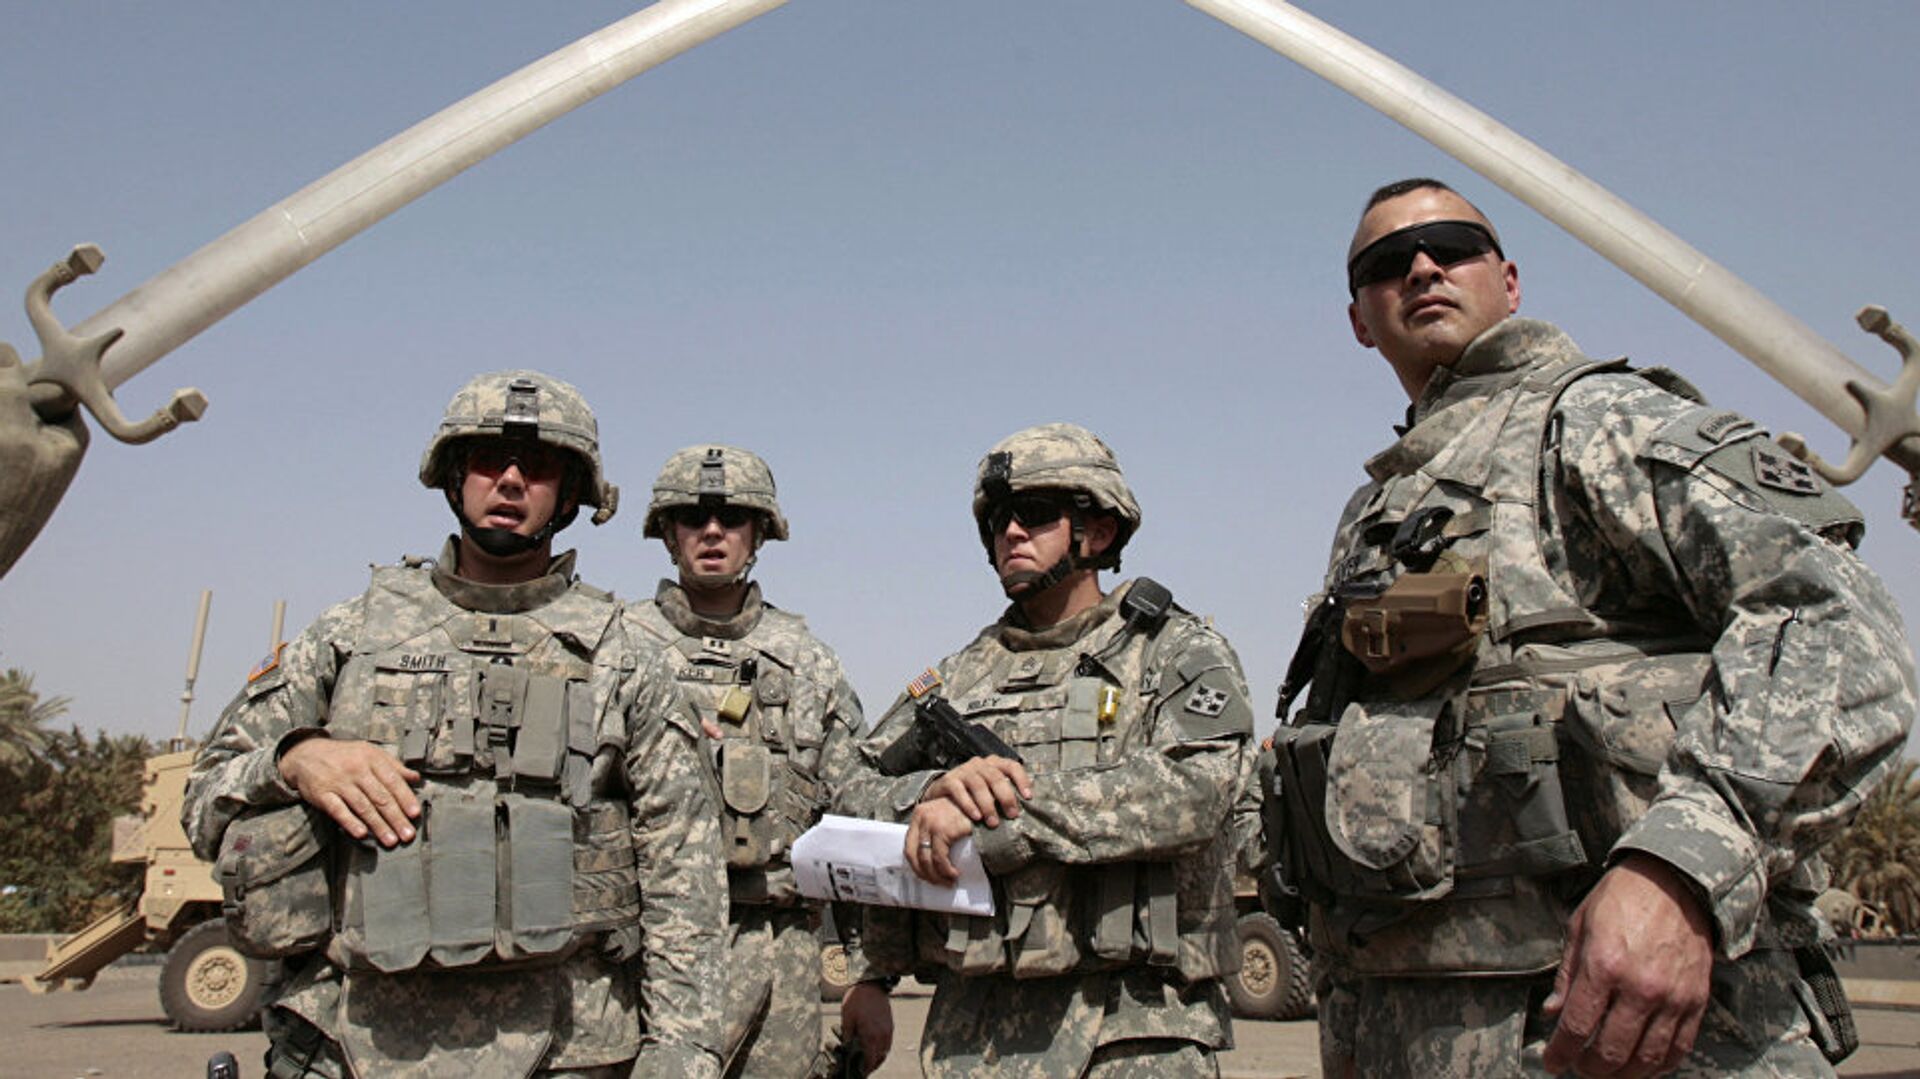  US soldiers stand near the landmark Hands of Victory, built by executed Iraqi president Saddam Hussein to commemorate Iraq's victory in the Iran-Iraq war, inside Baghdad's Green Zone as they prepare to go on a mission on July 5, 2008 - Sputnik International, 1920, 29.06.2021